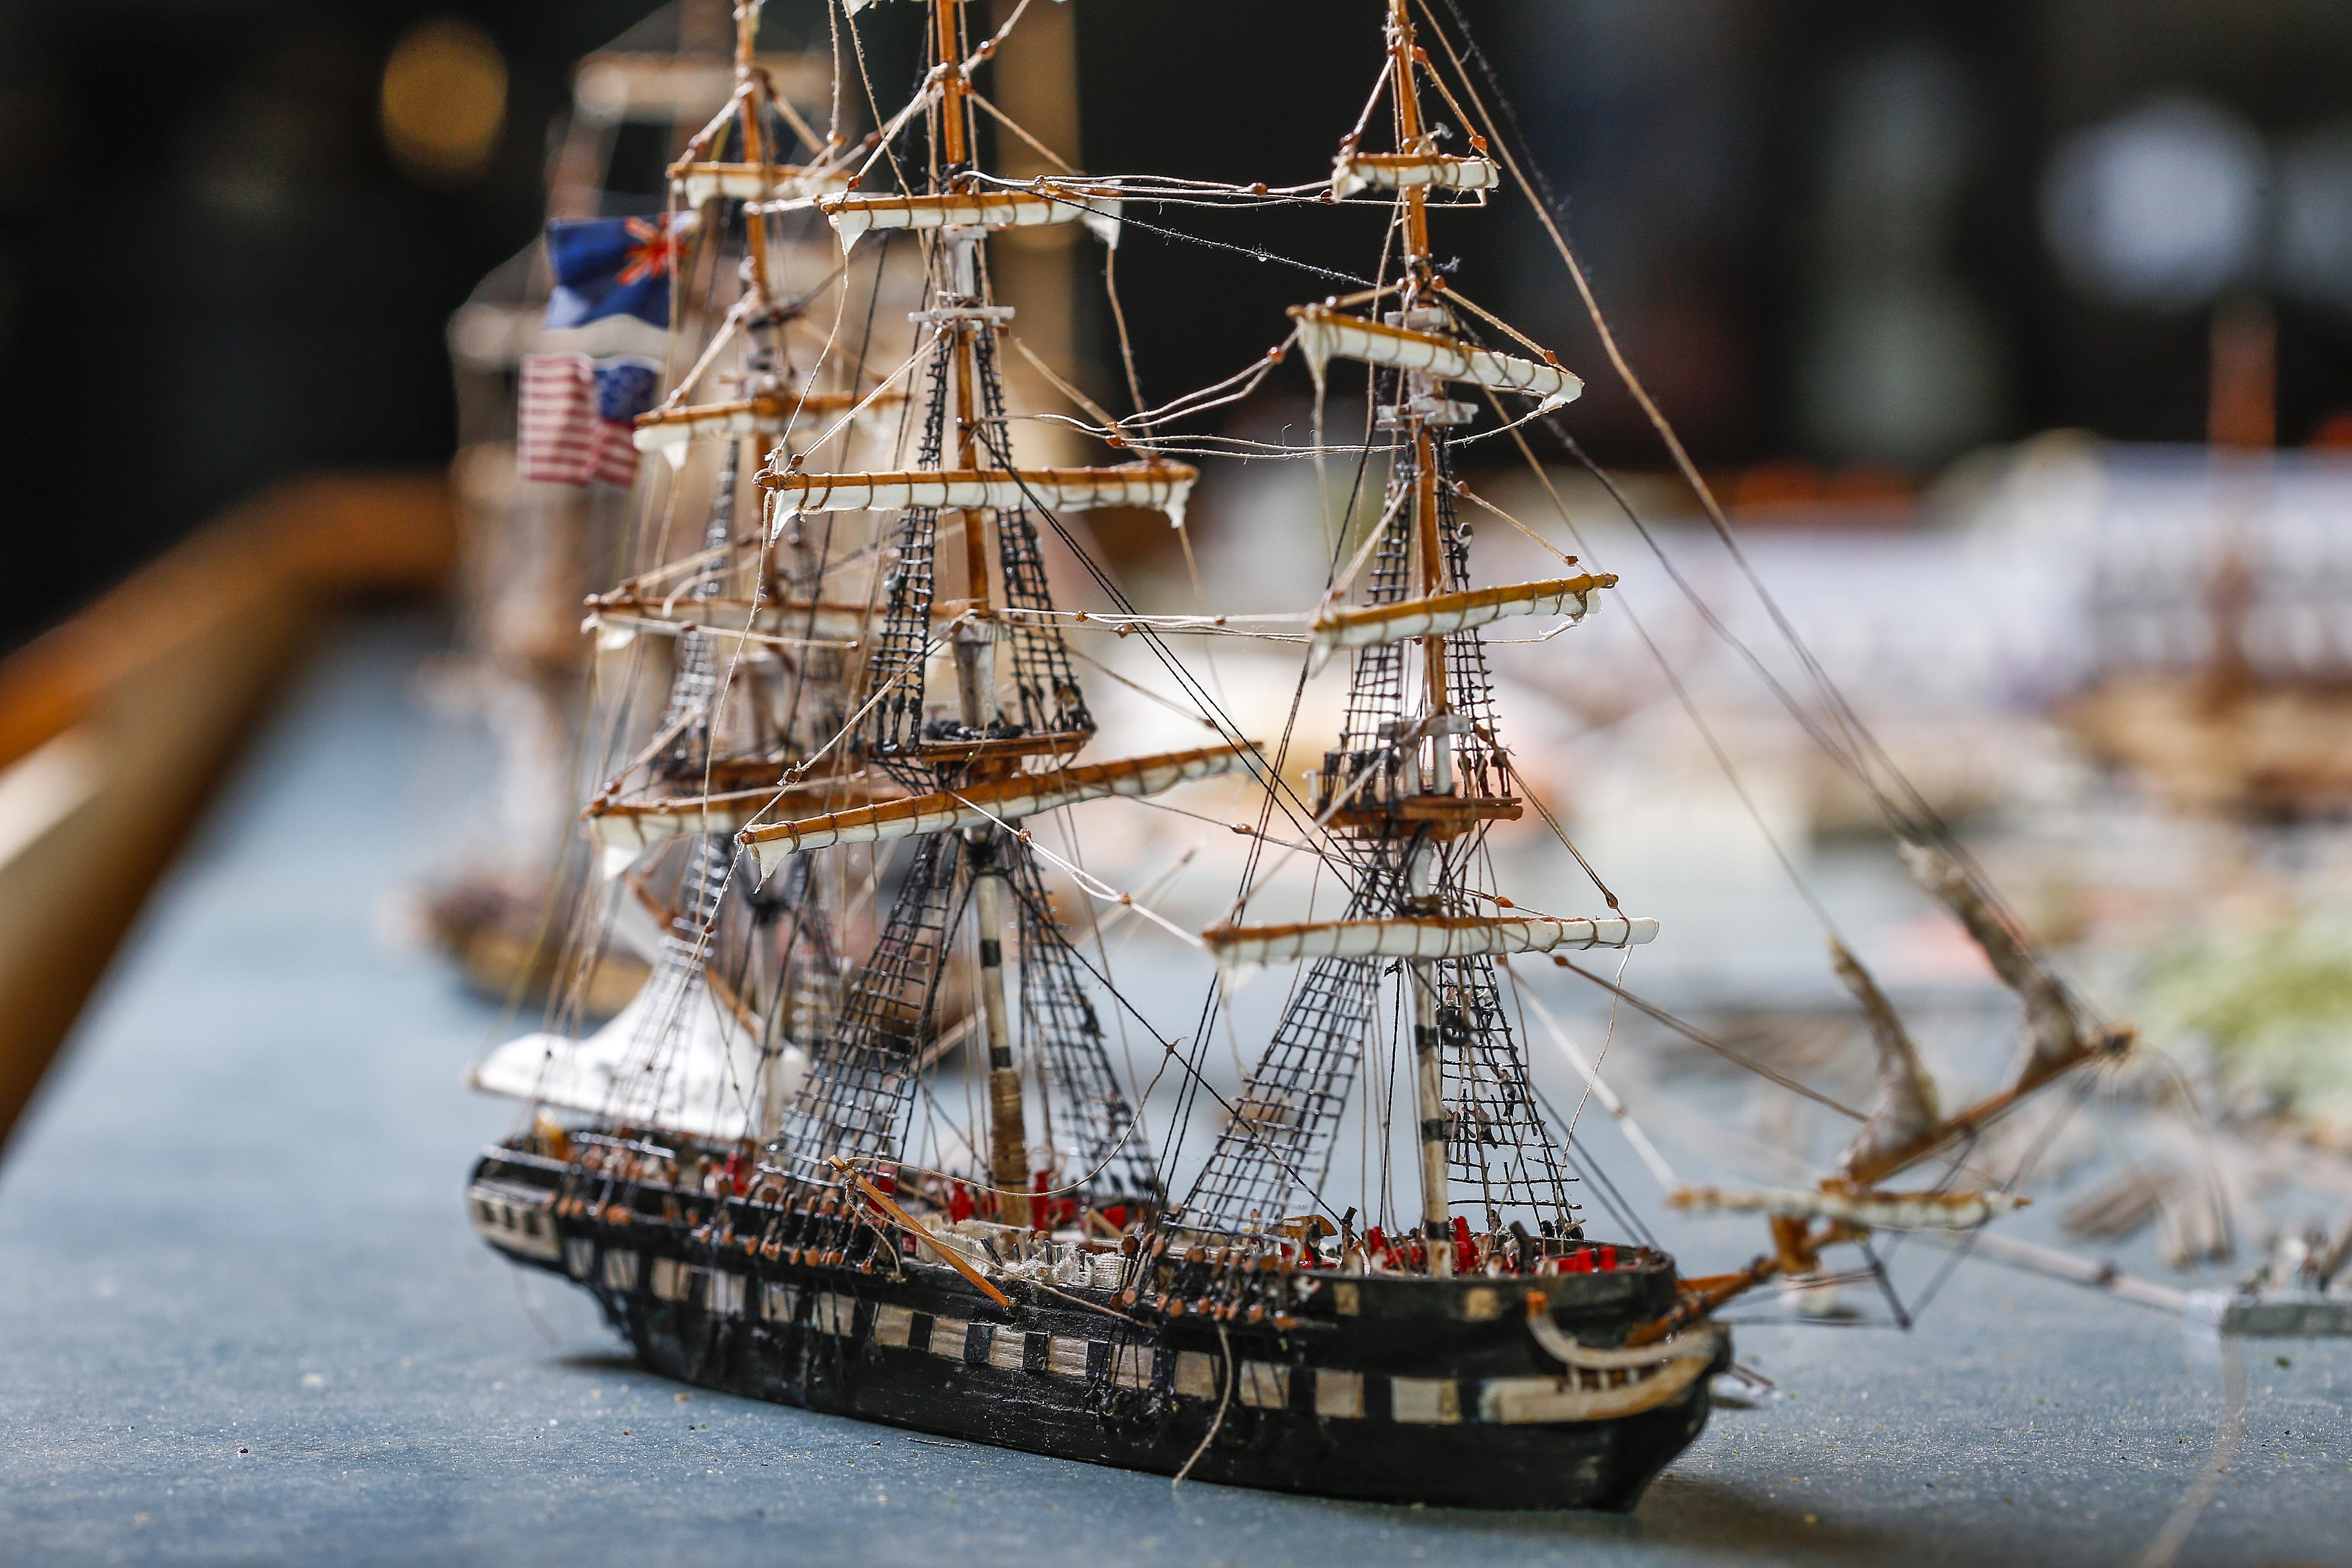 image of a miniature model of a ship.